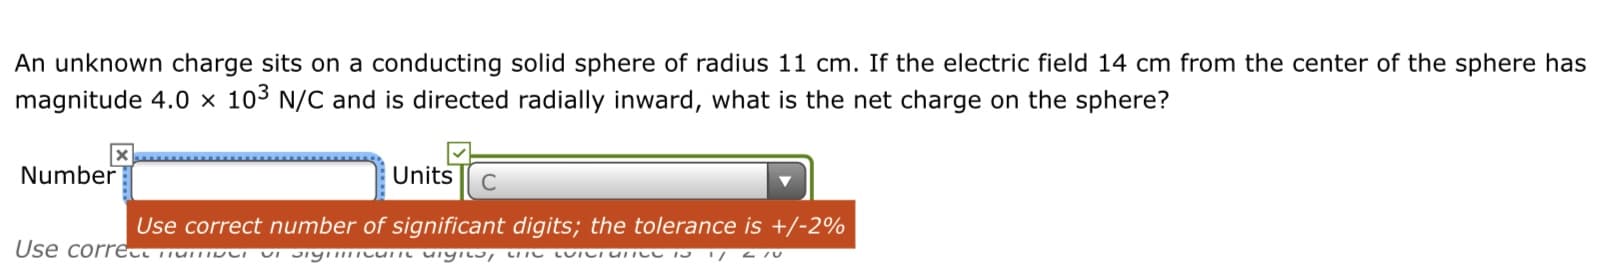 An unknown charge sits on a conducting solid sphere of radius 11 cm. If the electric field 14 cm from the center of the sphere has
magnitude 4.0 × 103 N/C and is directed radially inward, what is the net charge on the sphere?
